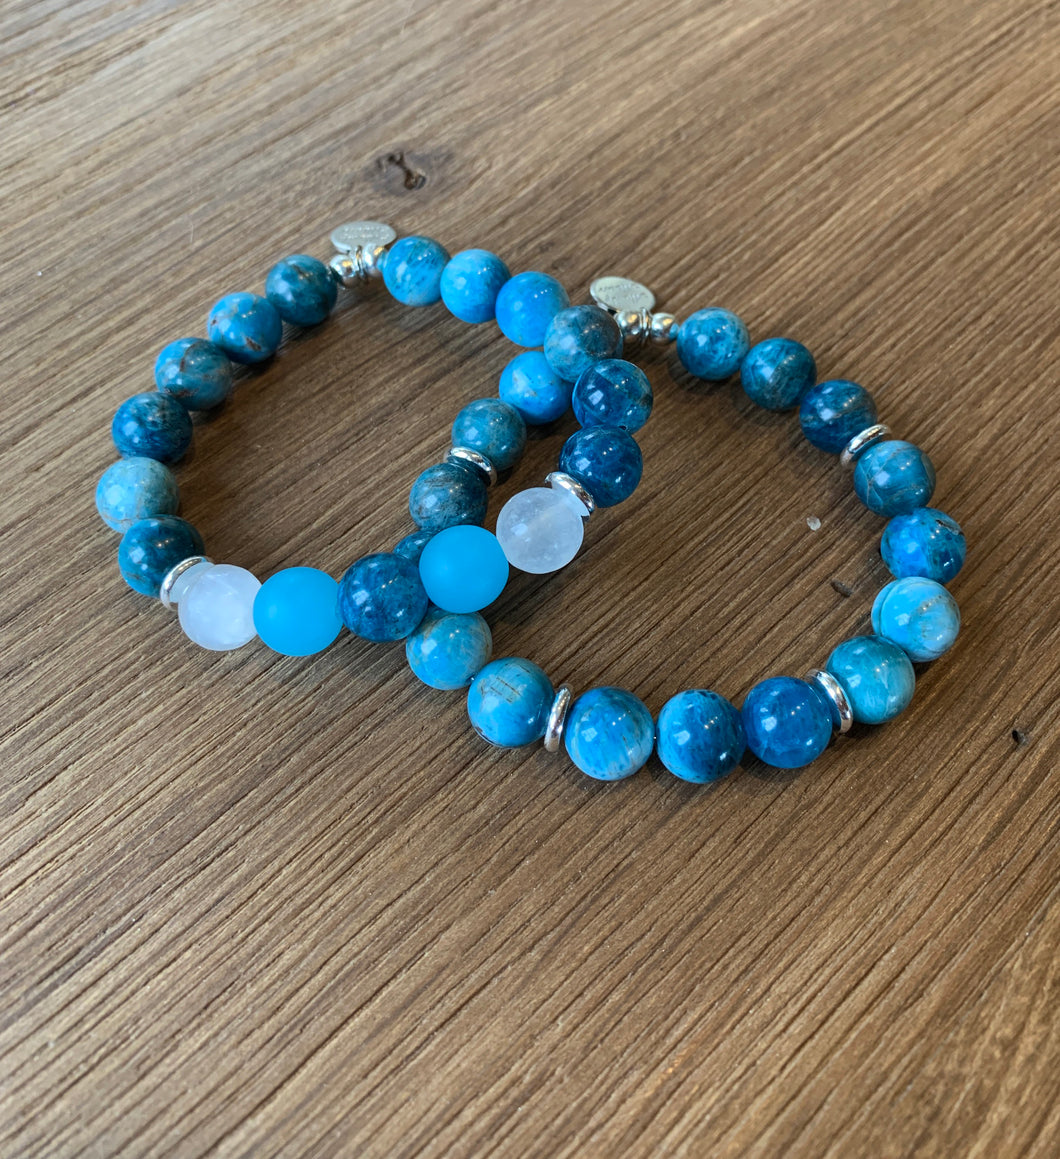 Crazy for ocean vibes~ crazy lace agate, sea glass and selenite beaded bracelet set